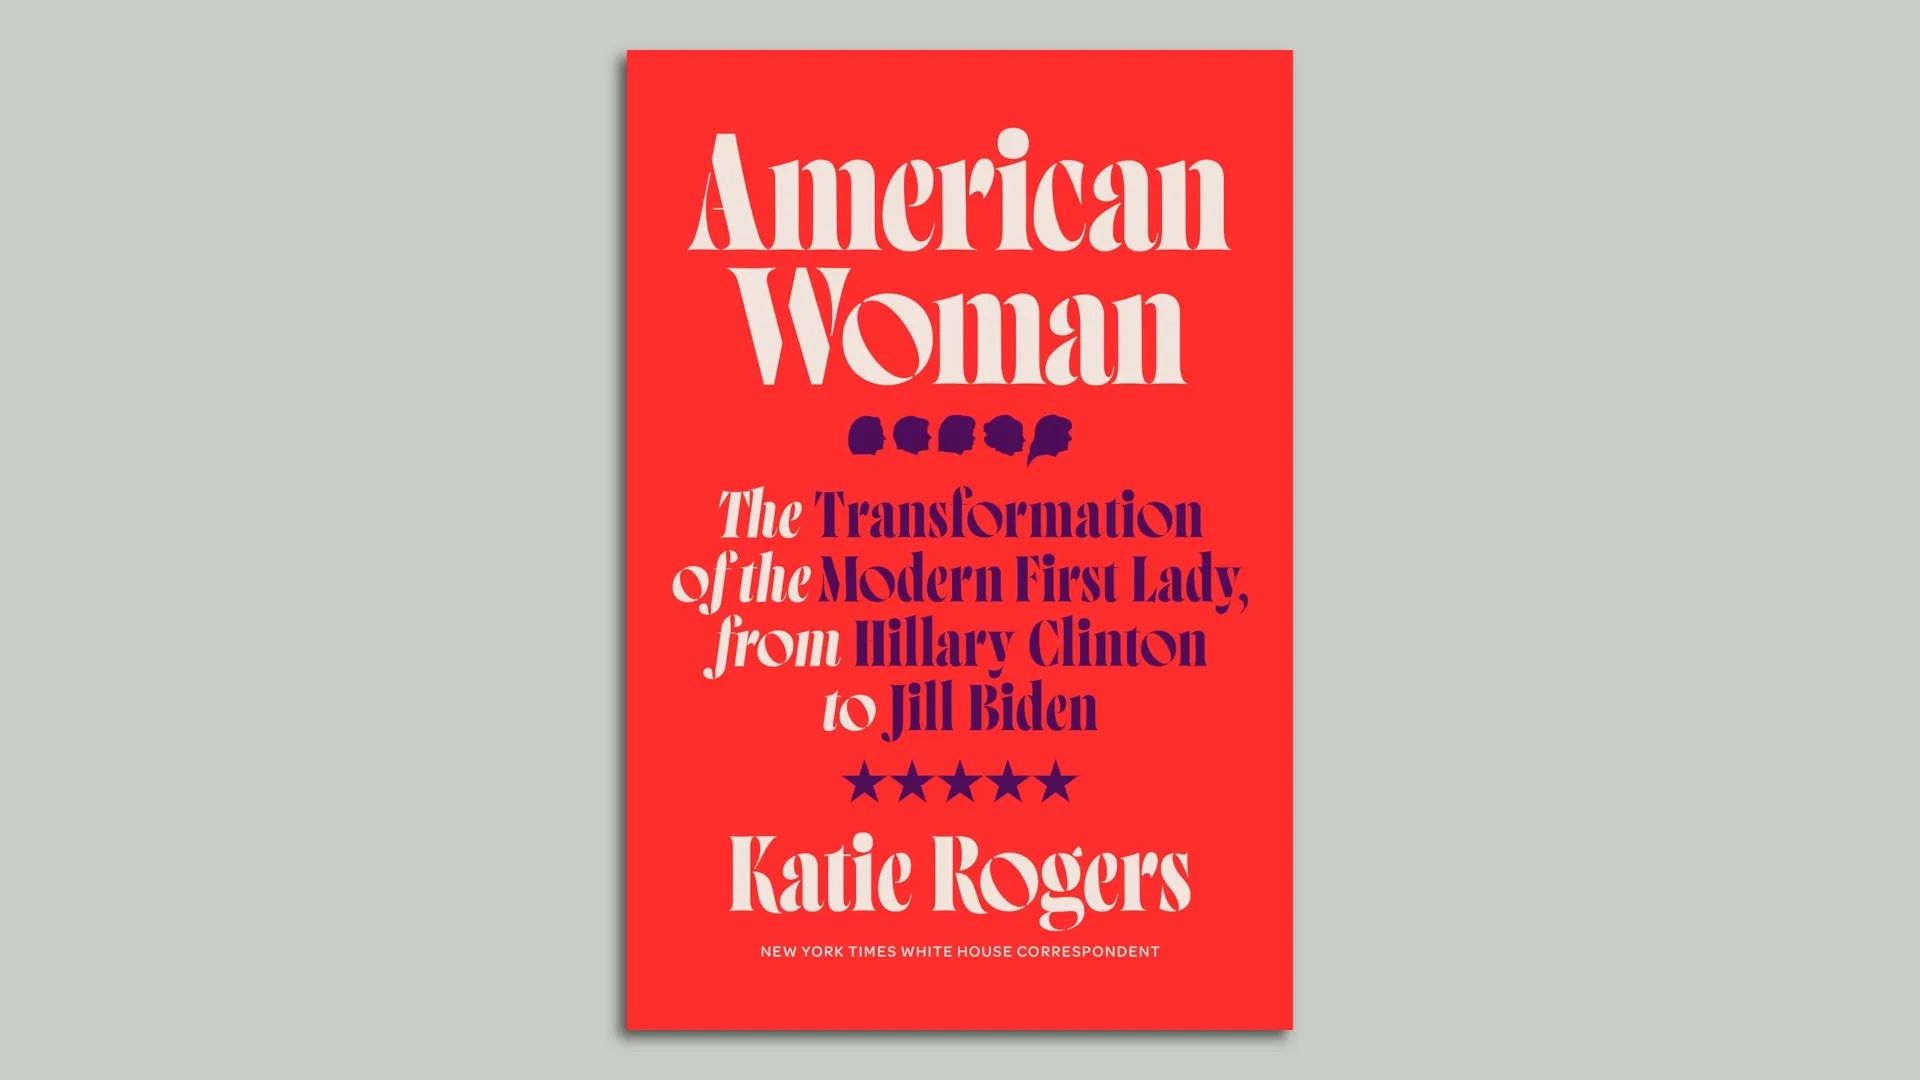 The red cover of "American Woman" by Katie Rogers